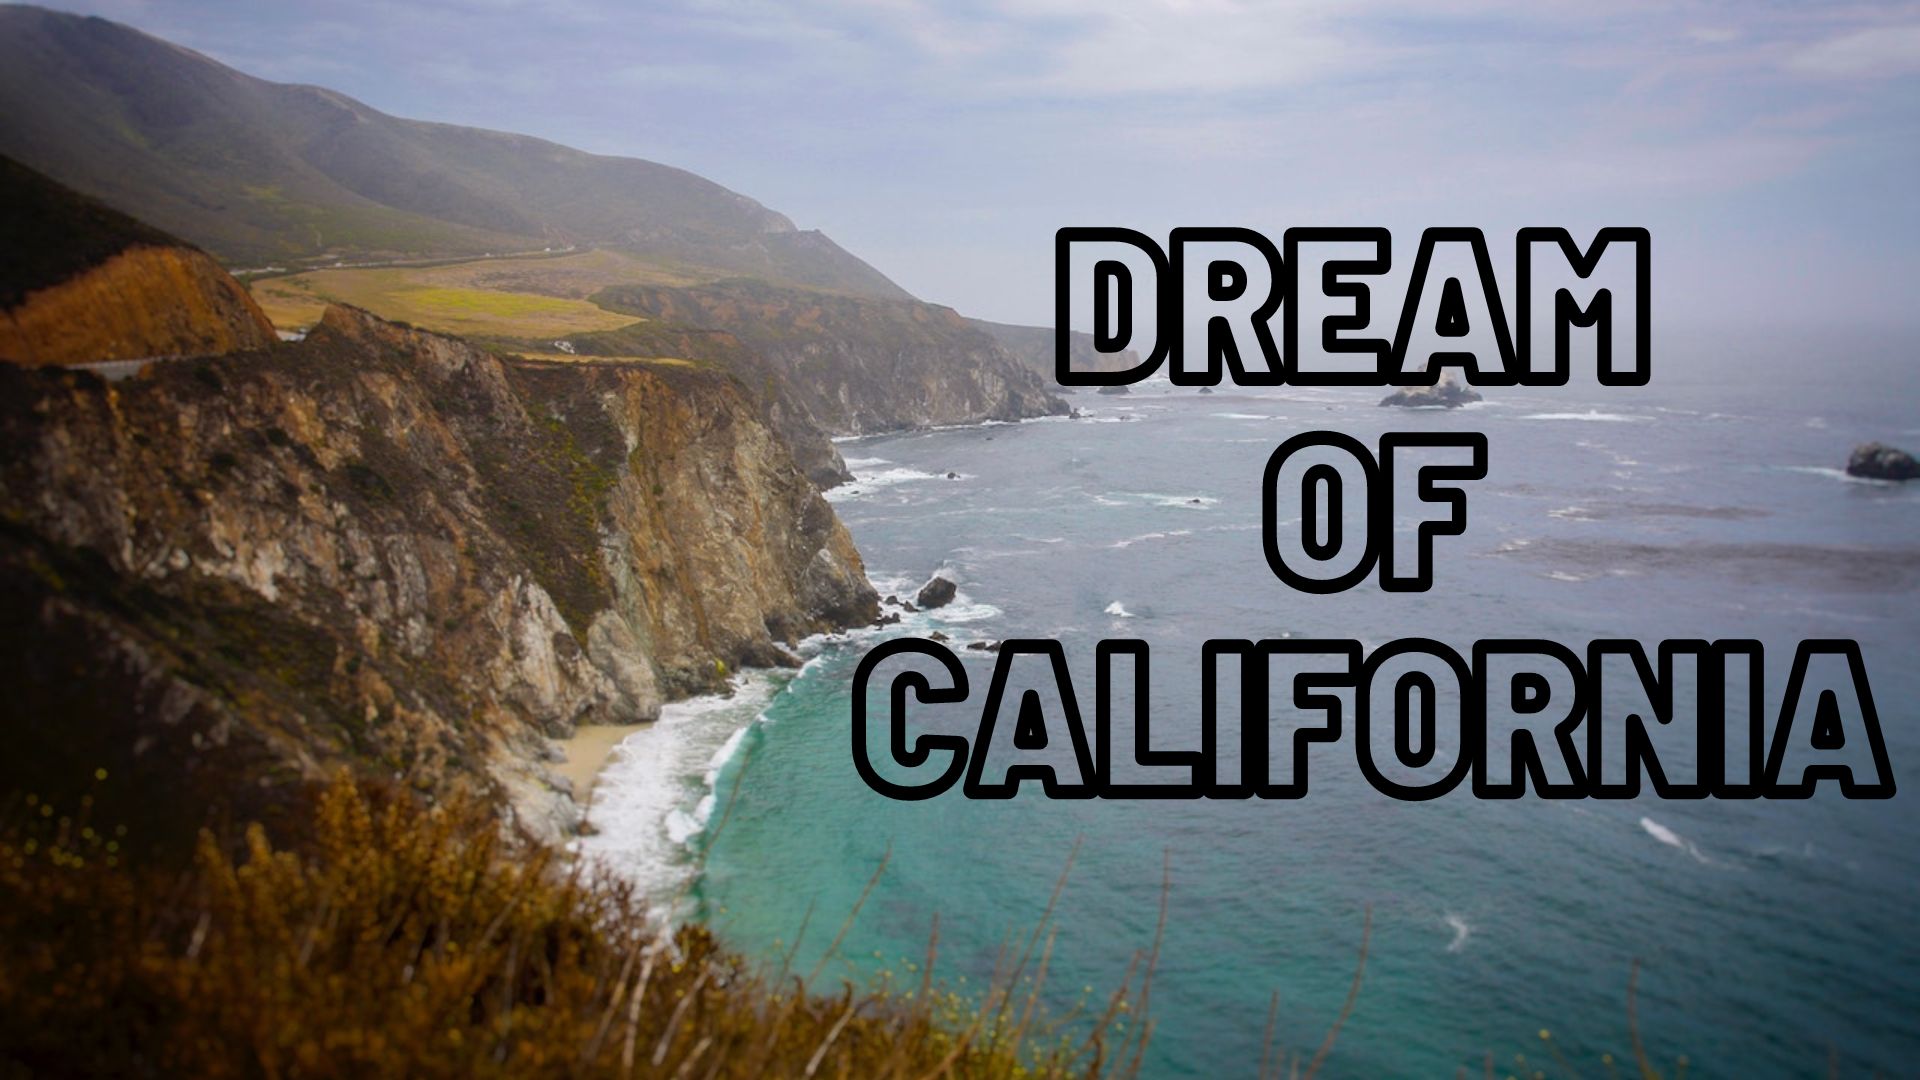 Dream Of California - What Does It Mean And Symbolize?